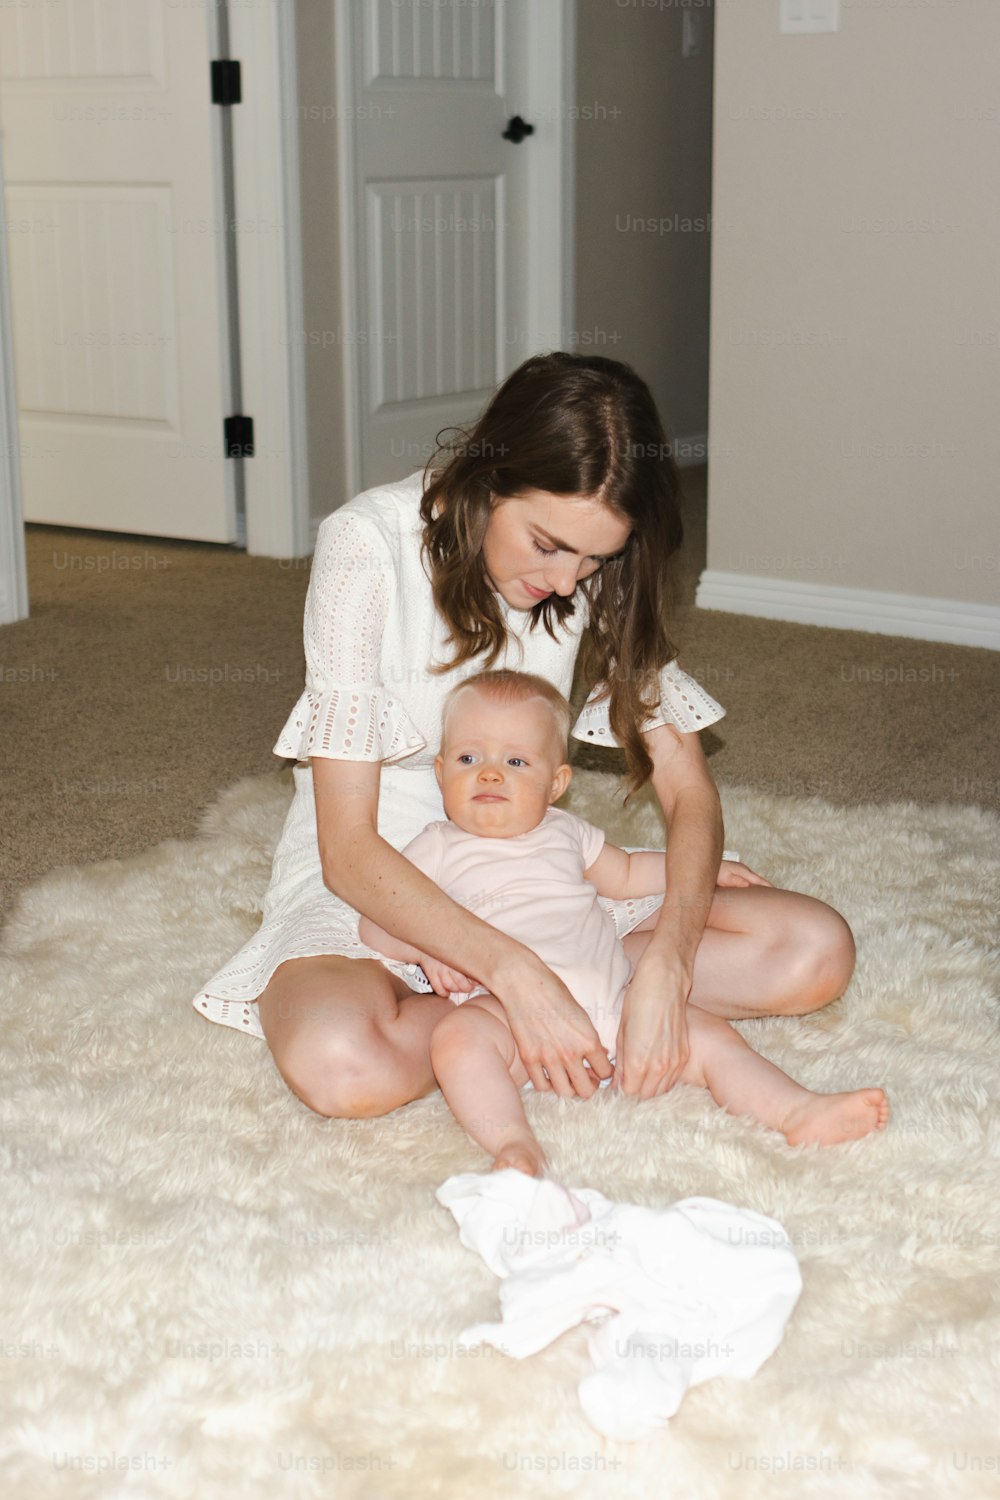 a woman sitting on the floor holding a baby